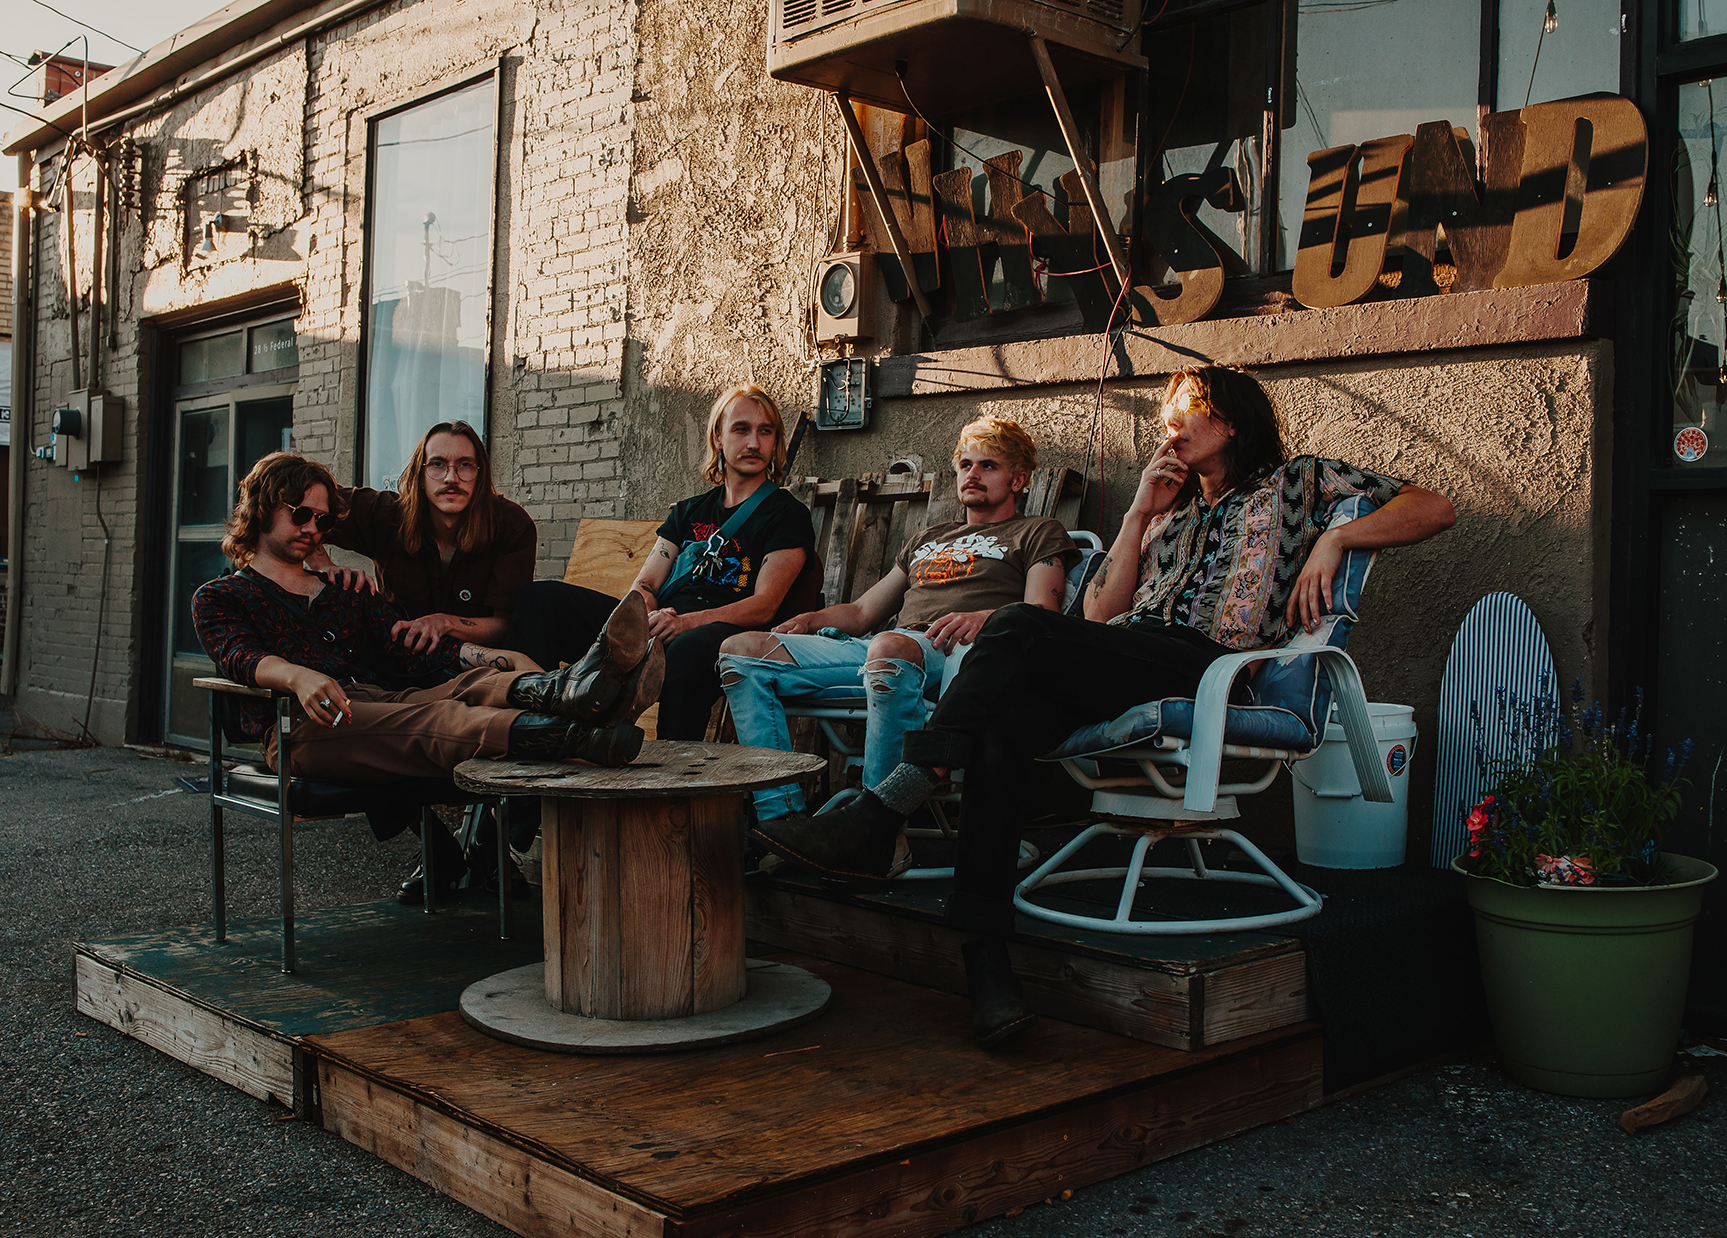 The Macks taking a break on tour in an Alley at sunset. Photo by Ian Enger.